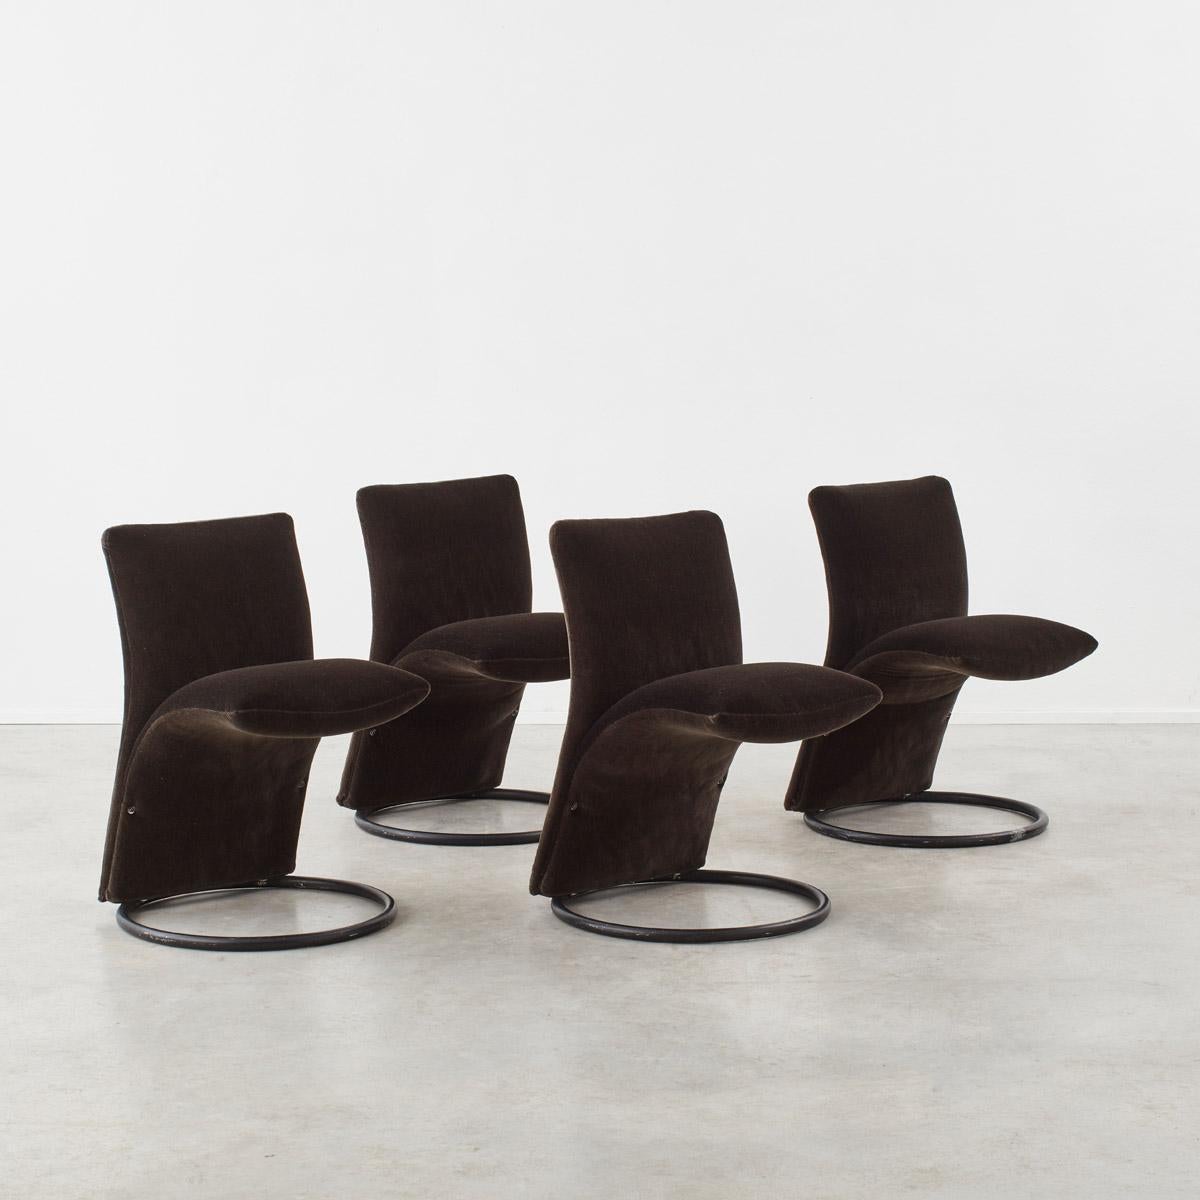 PRICED FOR THE SET. 

A rare set of ‘Calla’ chairs by Italian modernist designer Pompeo Fumagalli. Perched on a
ring-shaped tubular base, the frame has a gentle forward lean, with the seat and back
opening out like a flower in side profile.

The